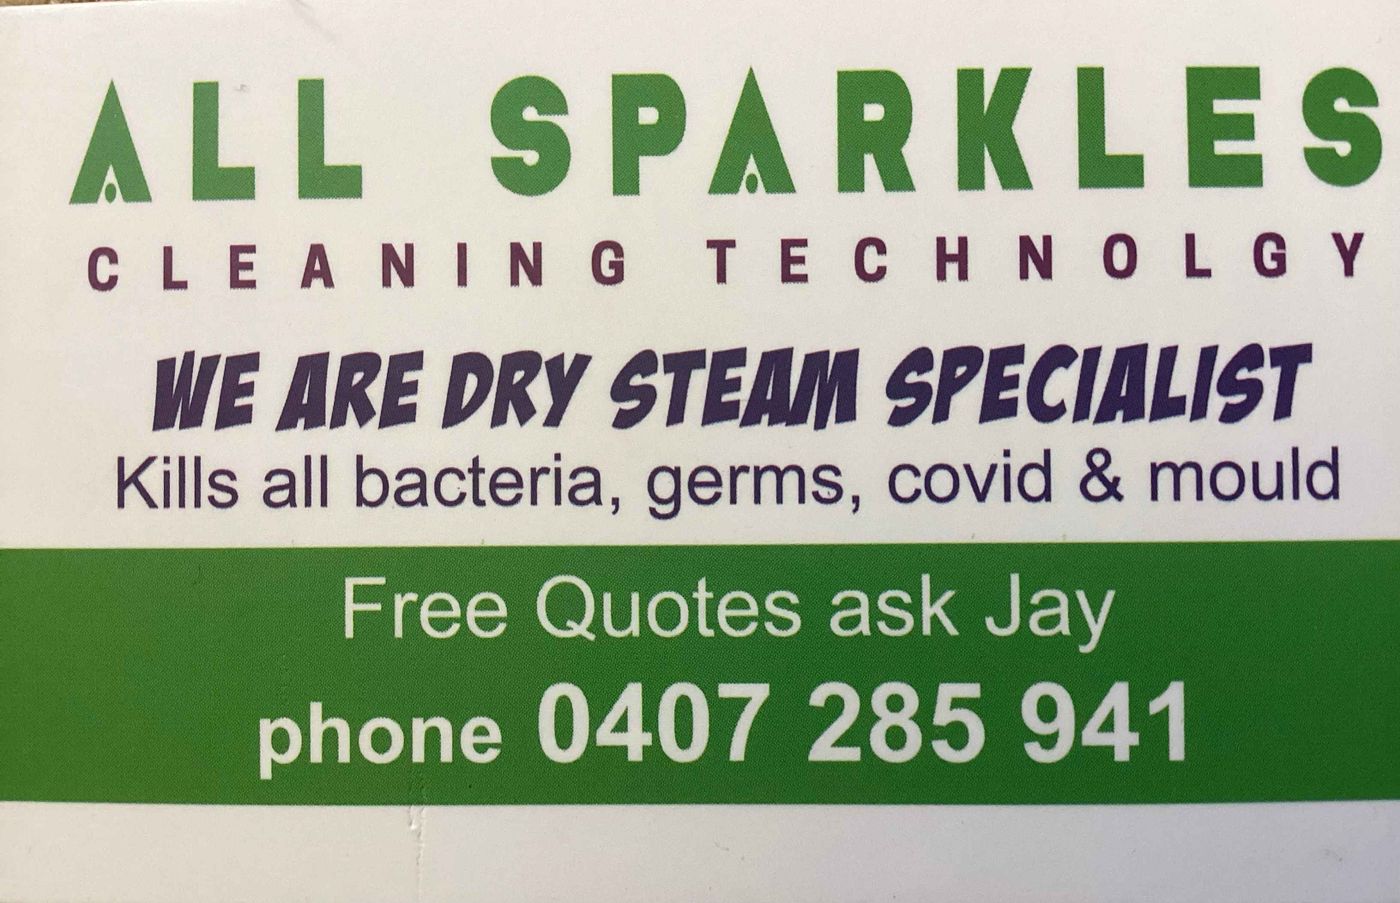 All Sparkles Cleaning Technology image